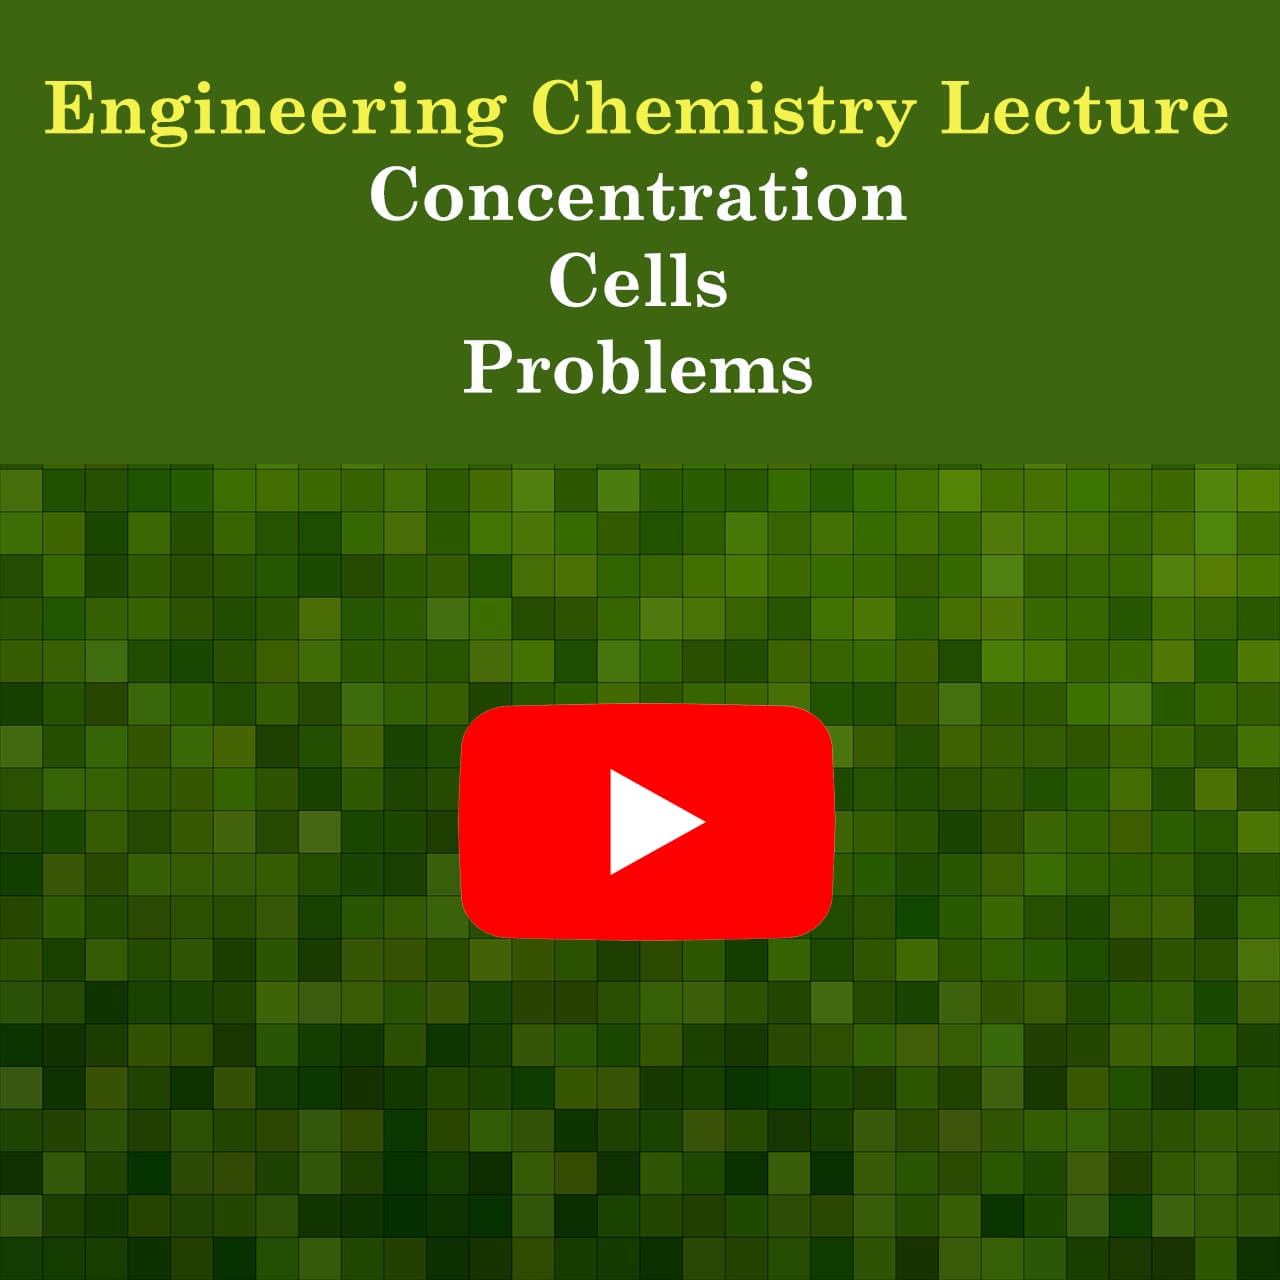 Concentration Cells - Problems and solutions with examples | Vtu Engineering Chemistry